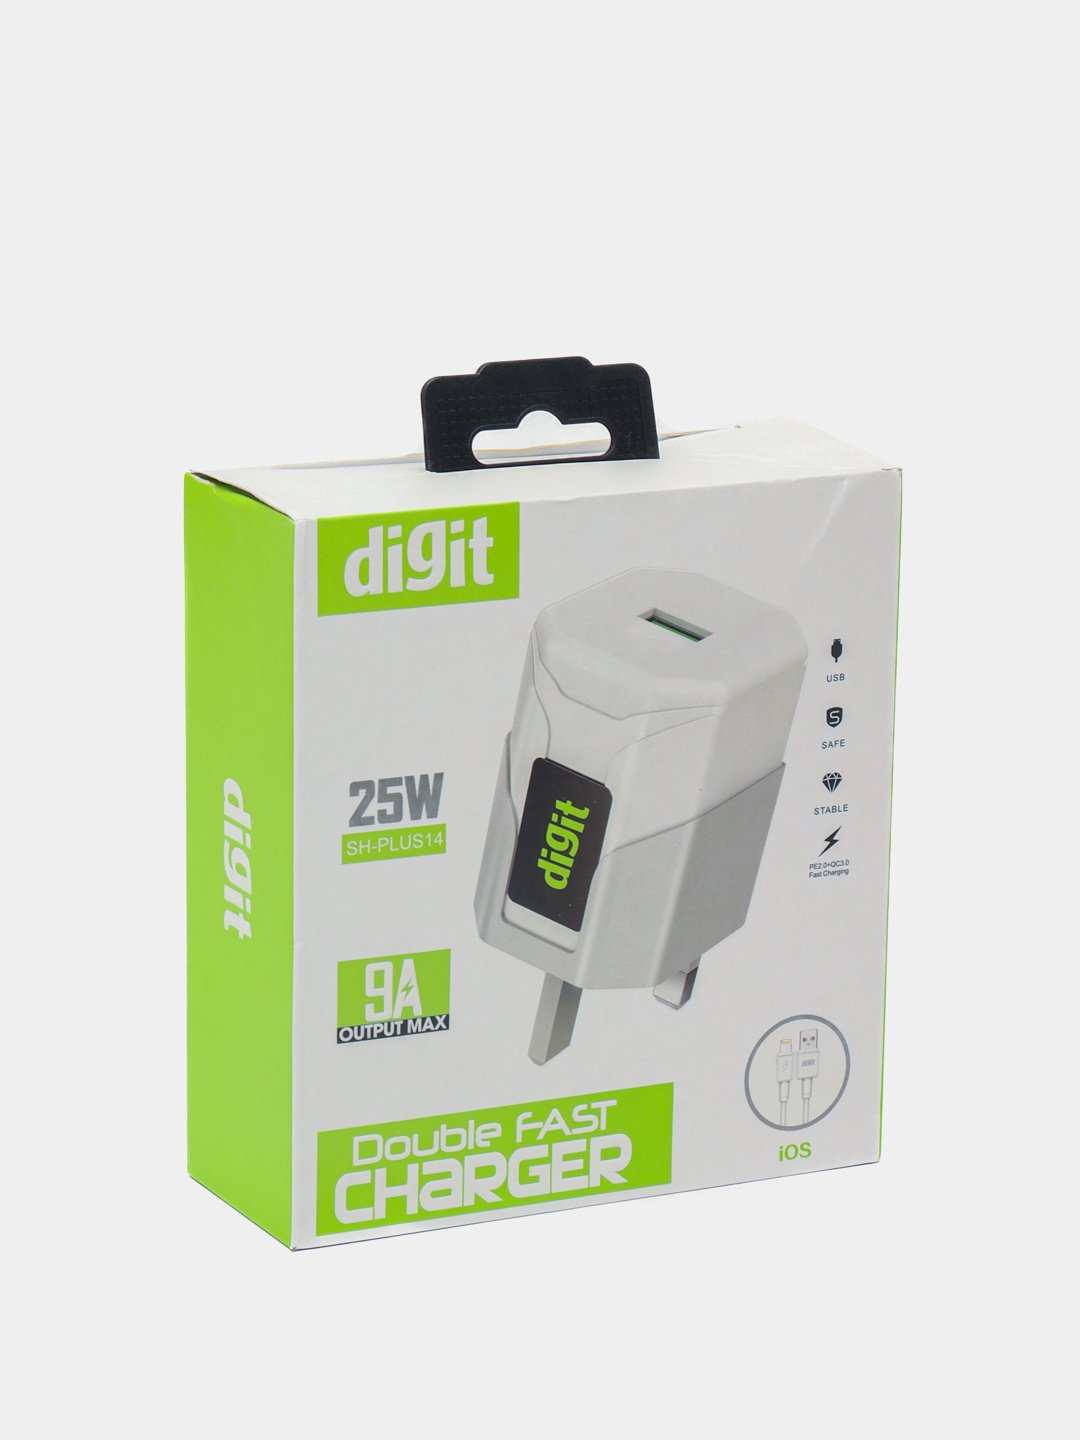 DIGIT SH-PLUS 25w DOUBLE FAST CHARGER